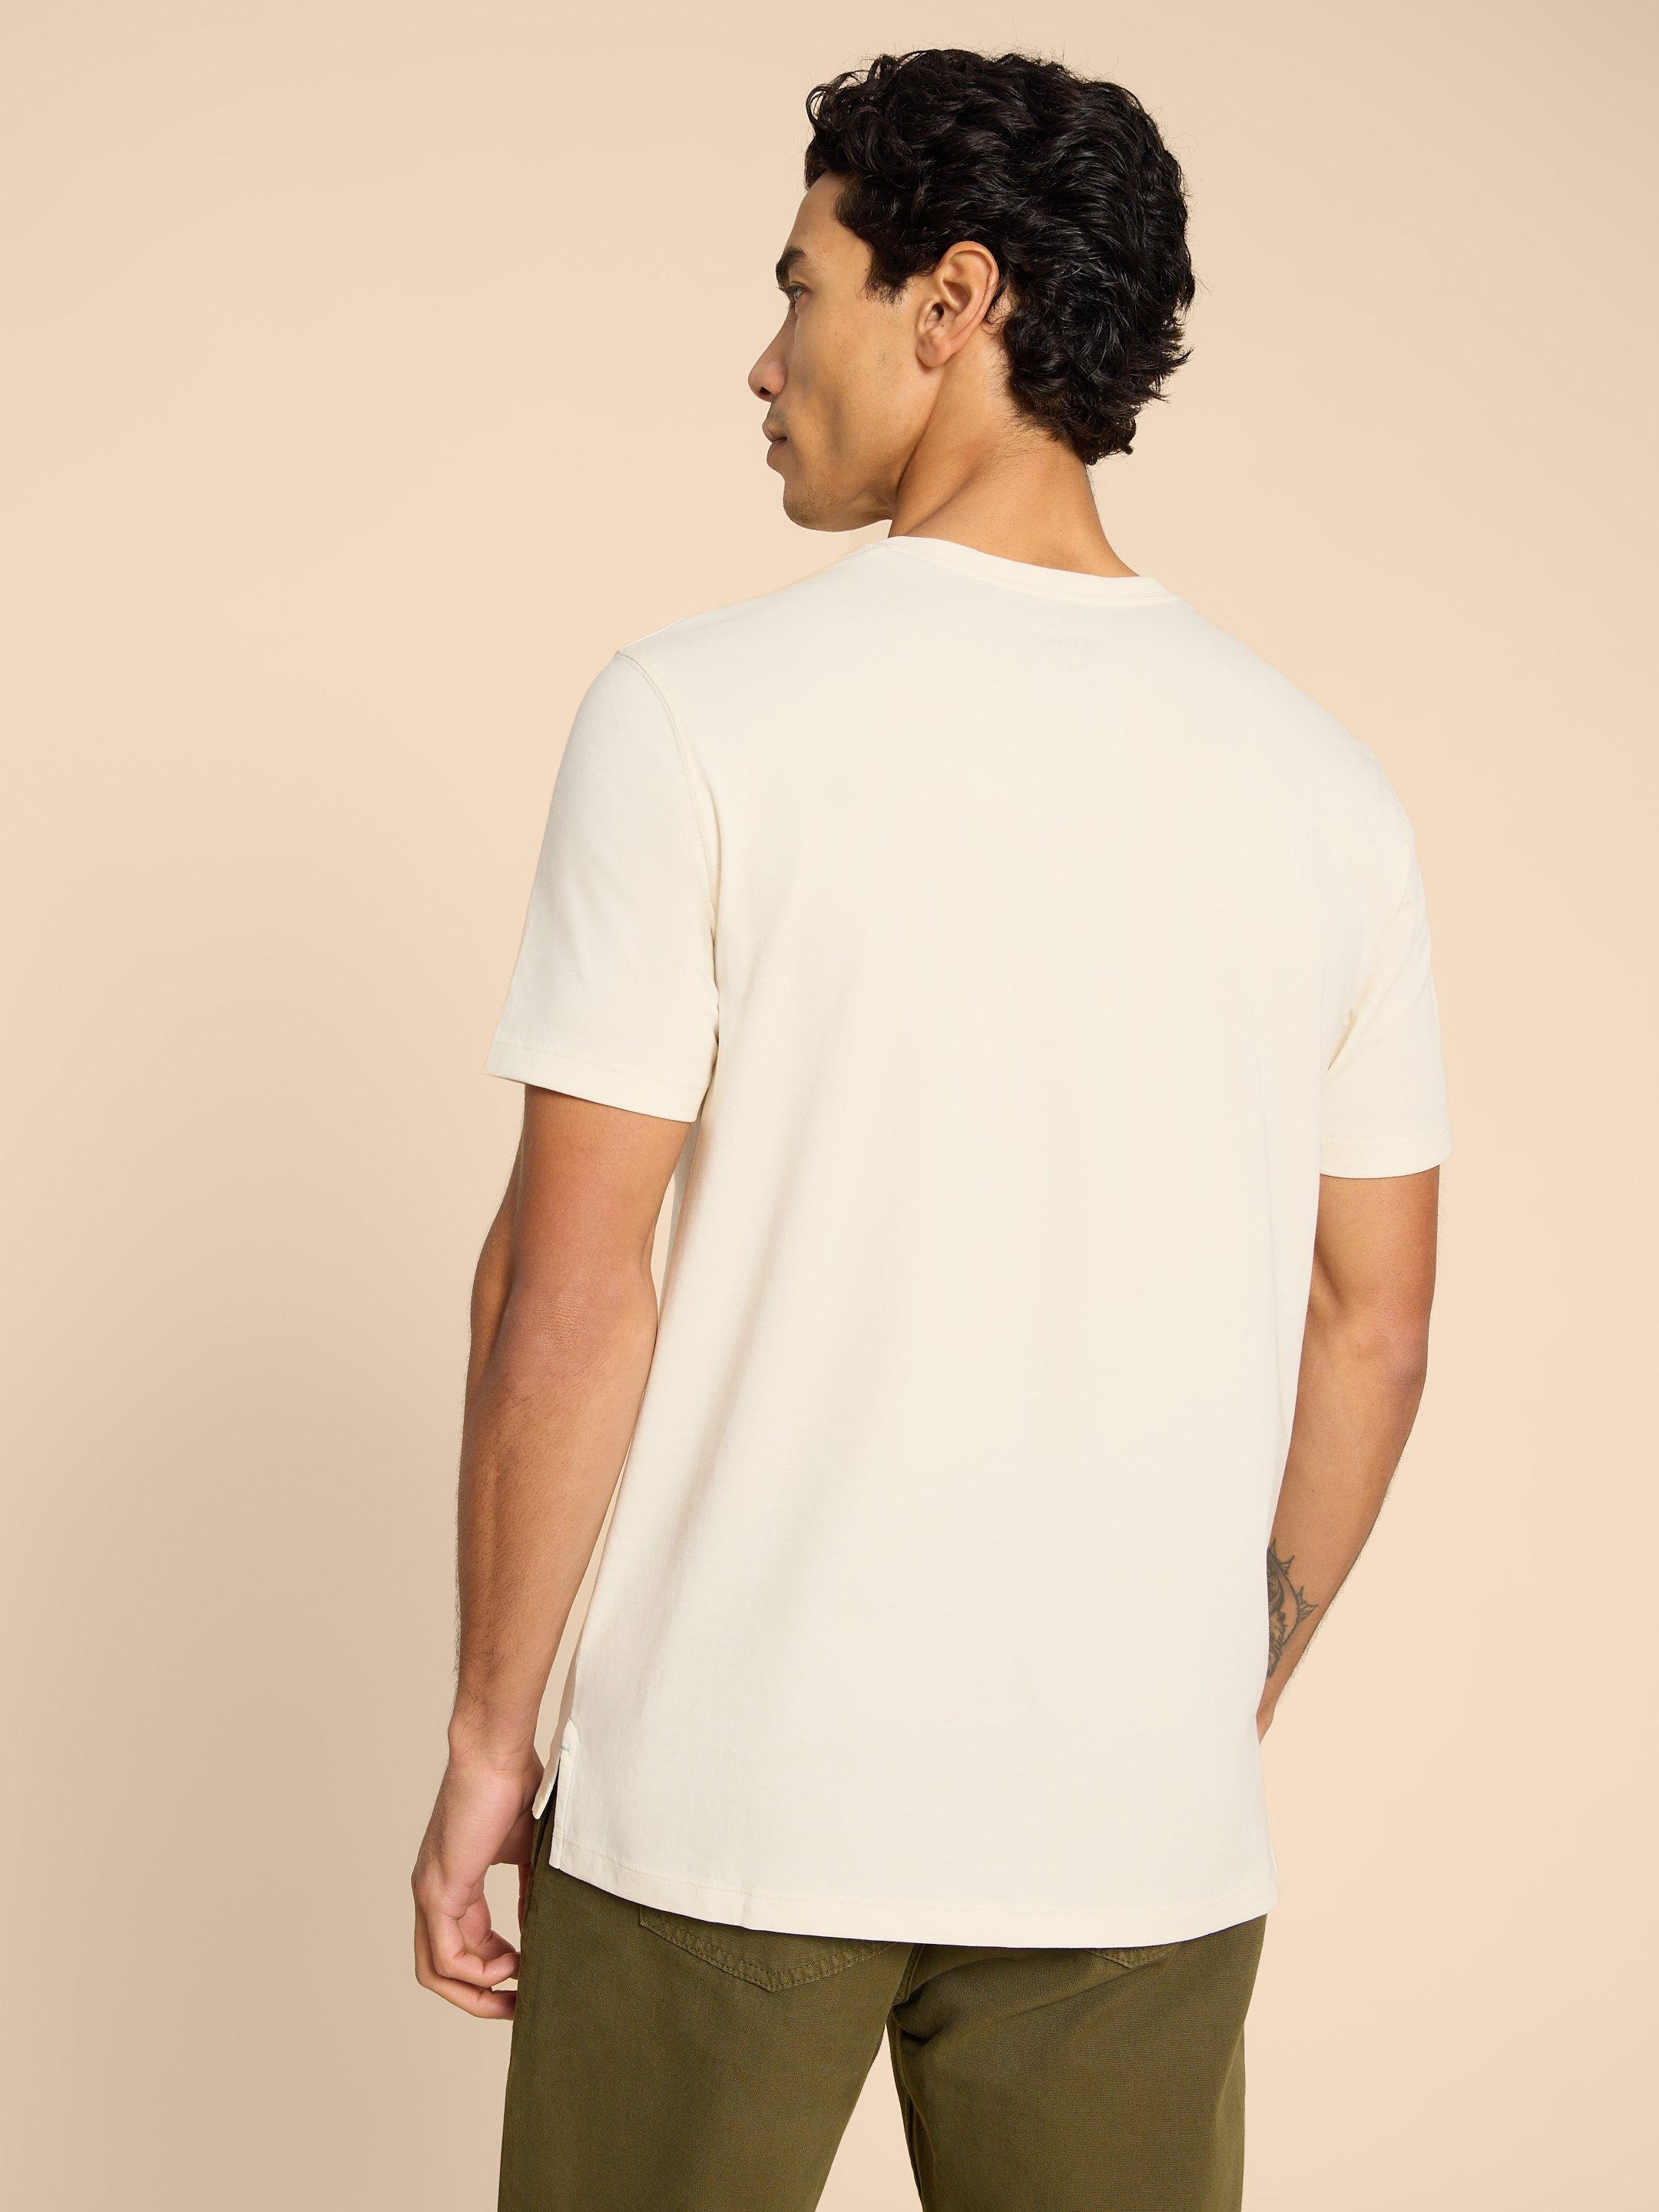 Crab Graphic Tee in WHITE PR - MODEL BACK